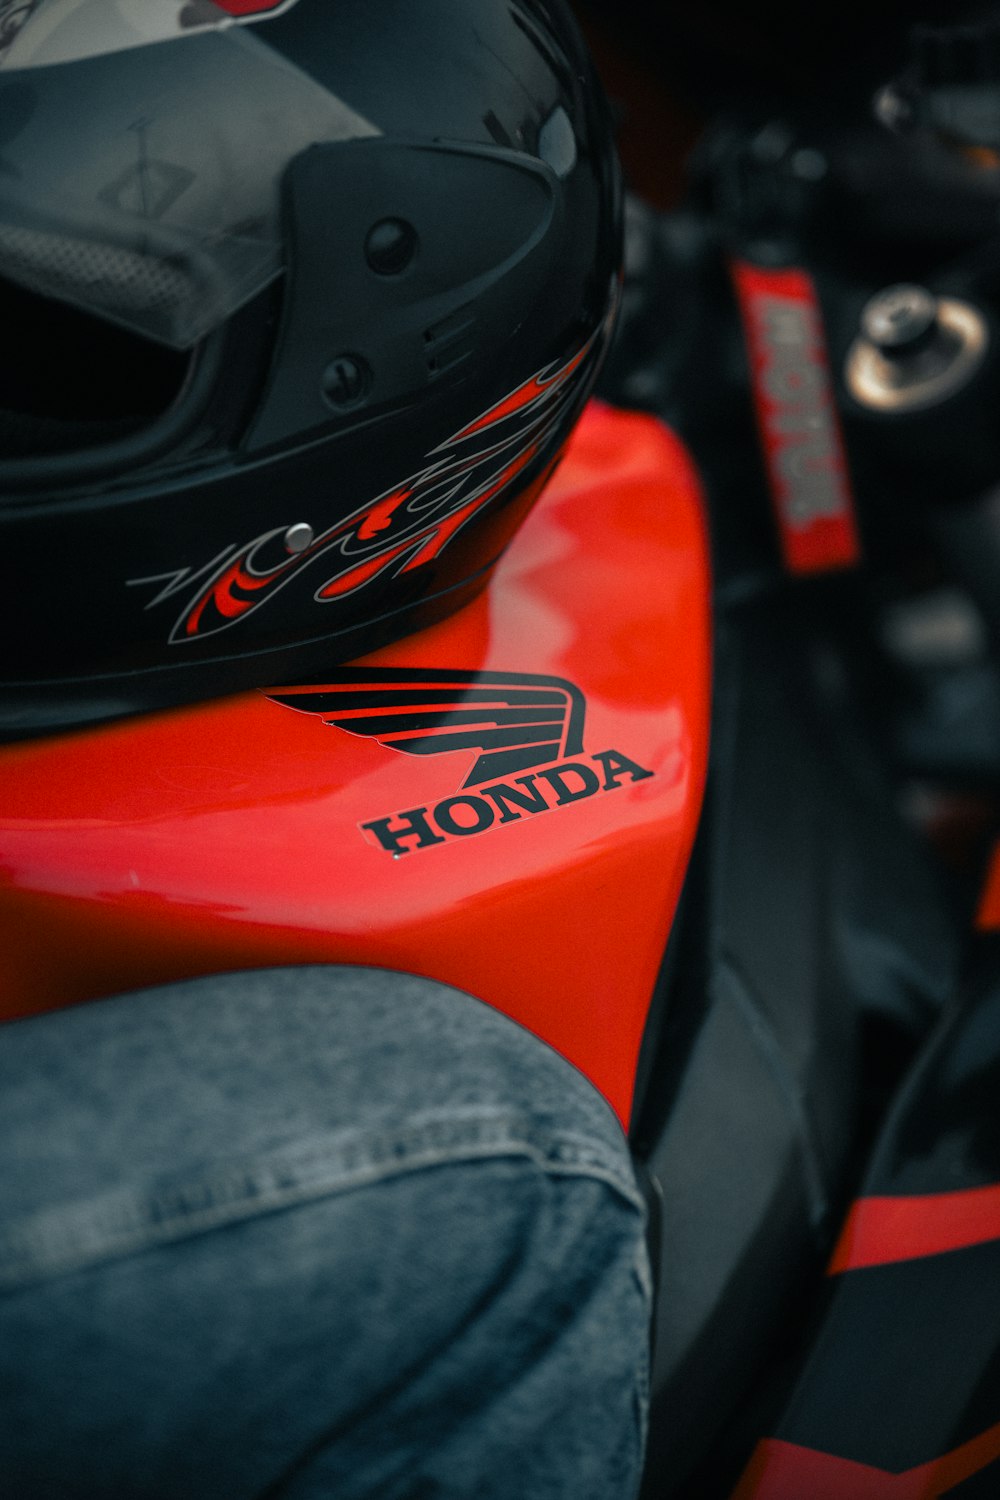 a close up of a helmet on a motorcycle